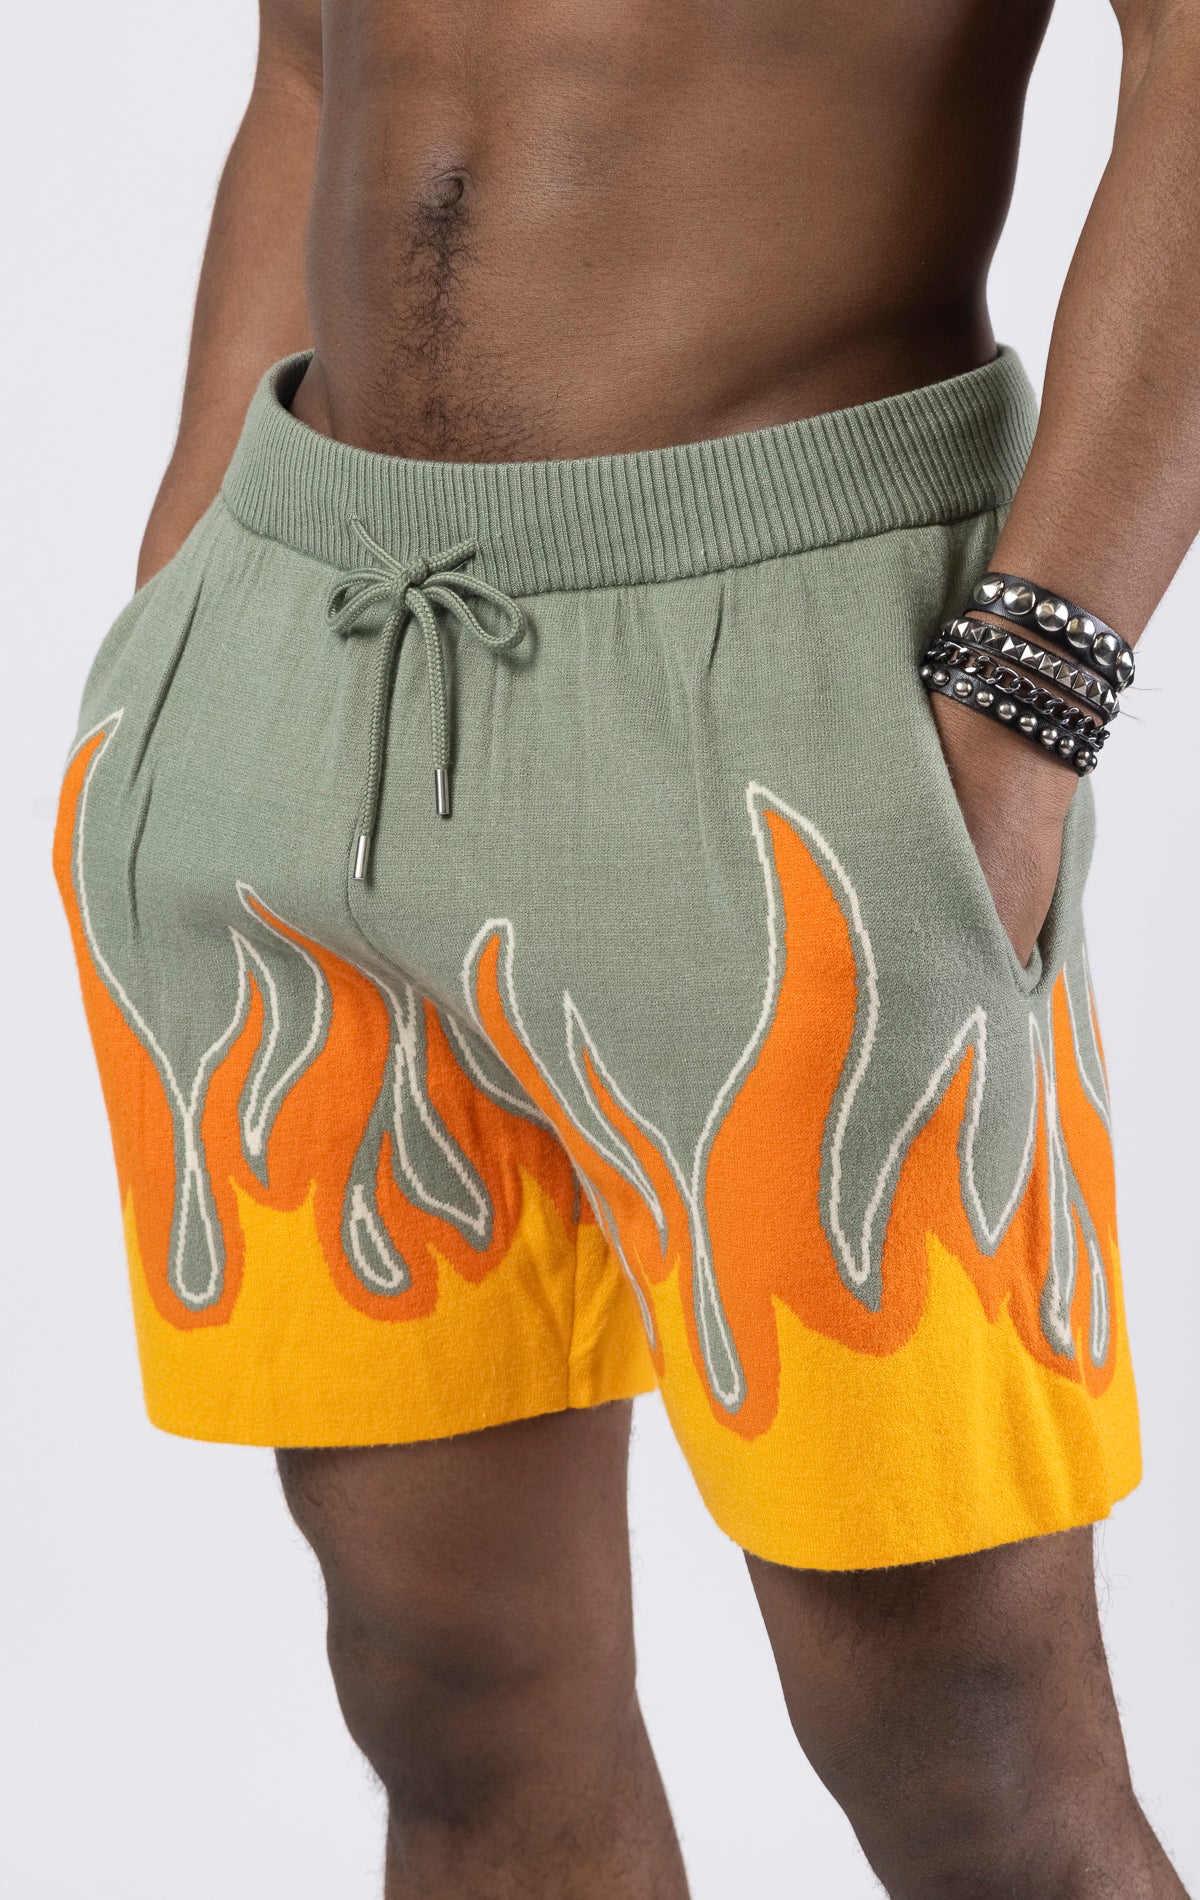 Sprayground Flame Sweater Shorts in sage green. Made from a soft and comfortable sweater material, these shorts feature a bold flame design on the bottom.